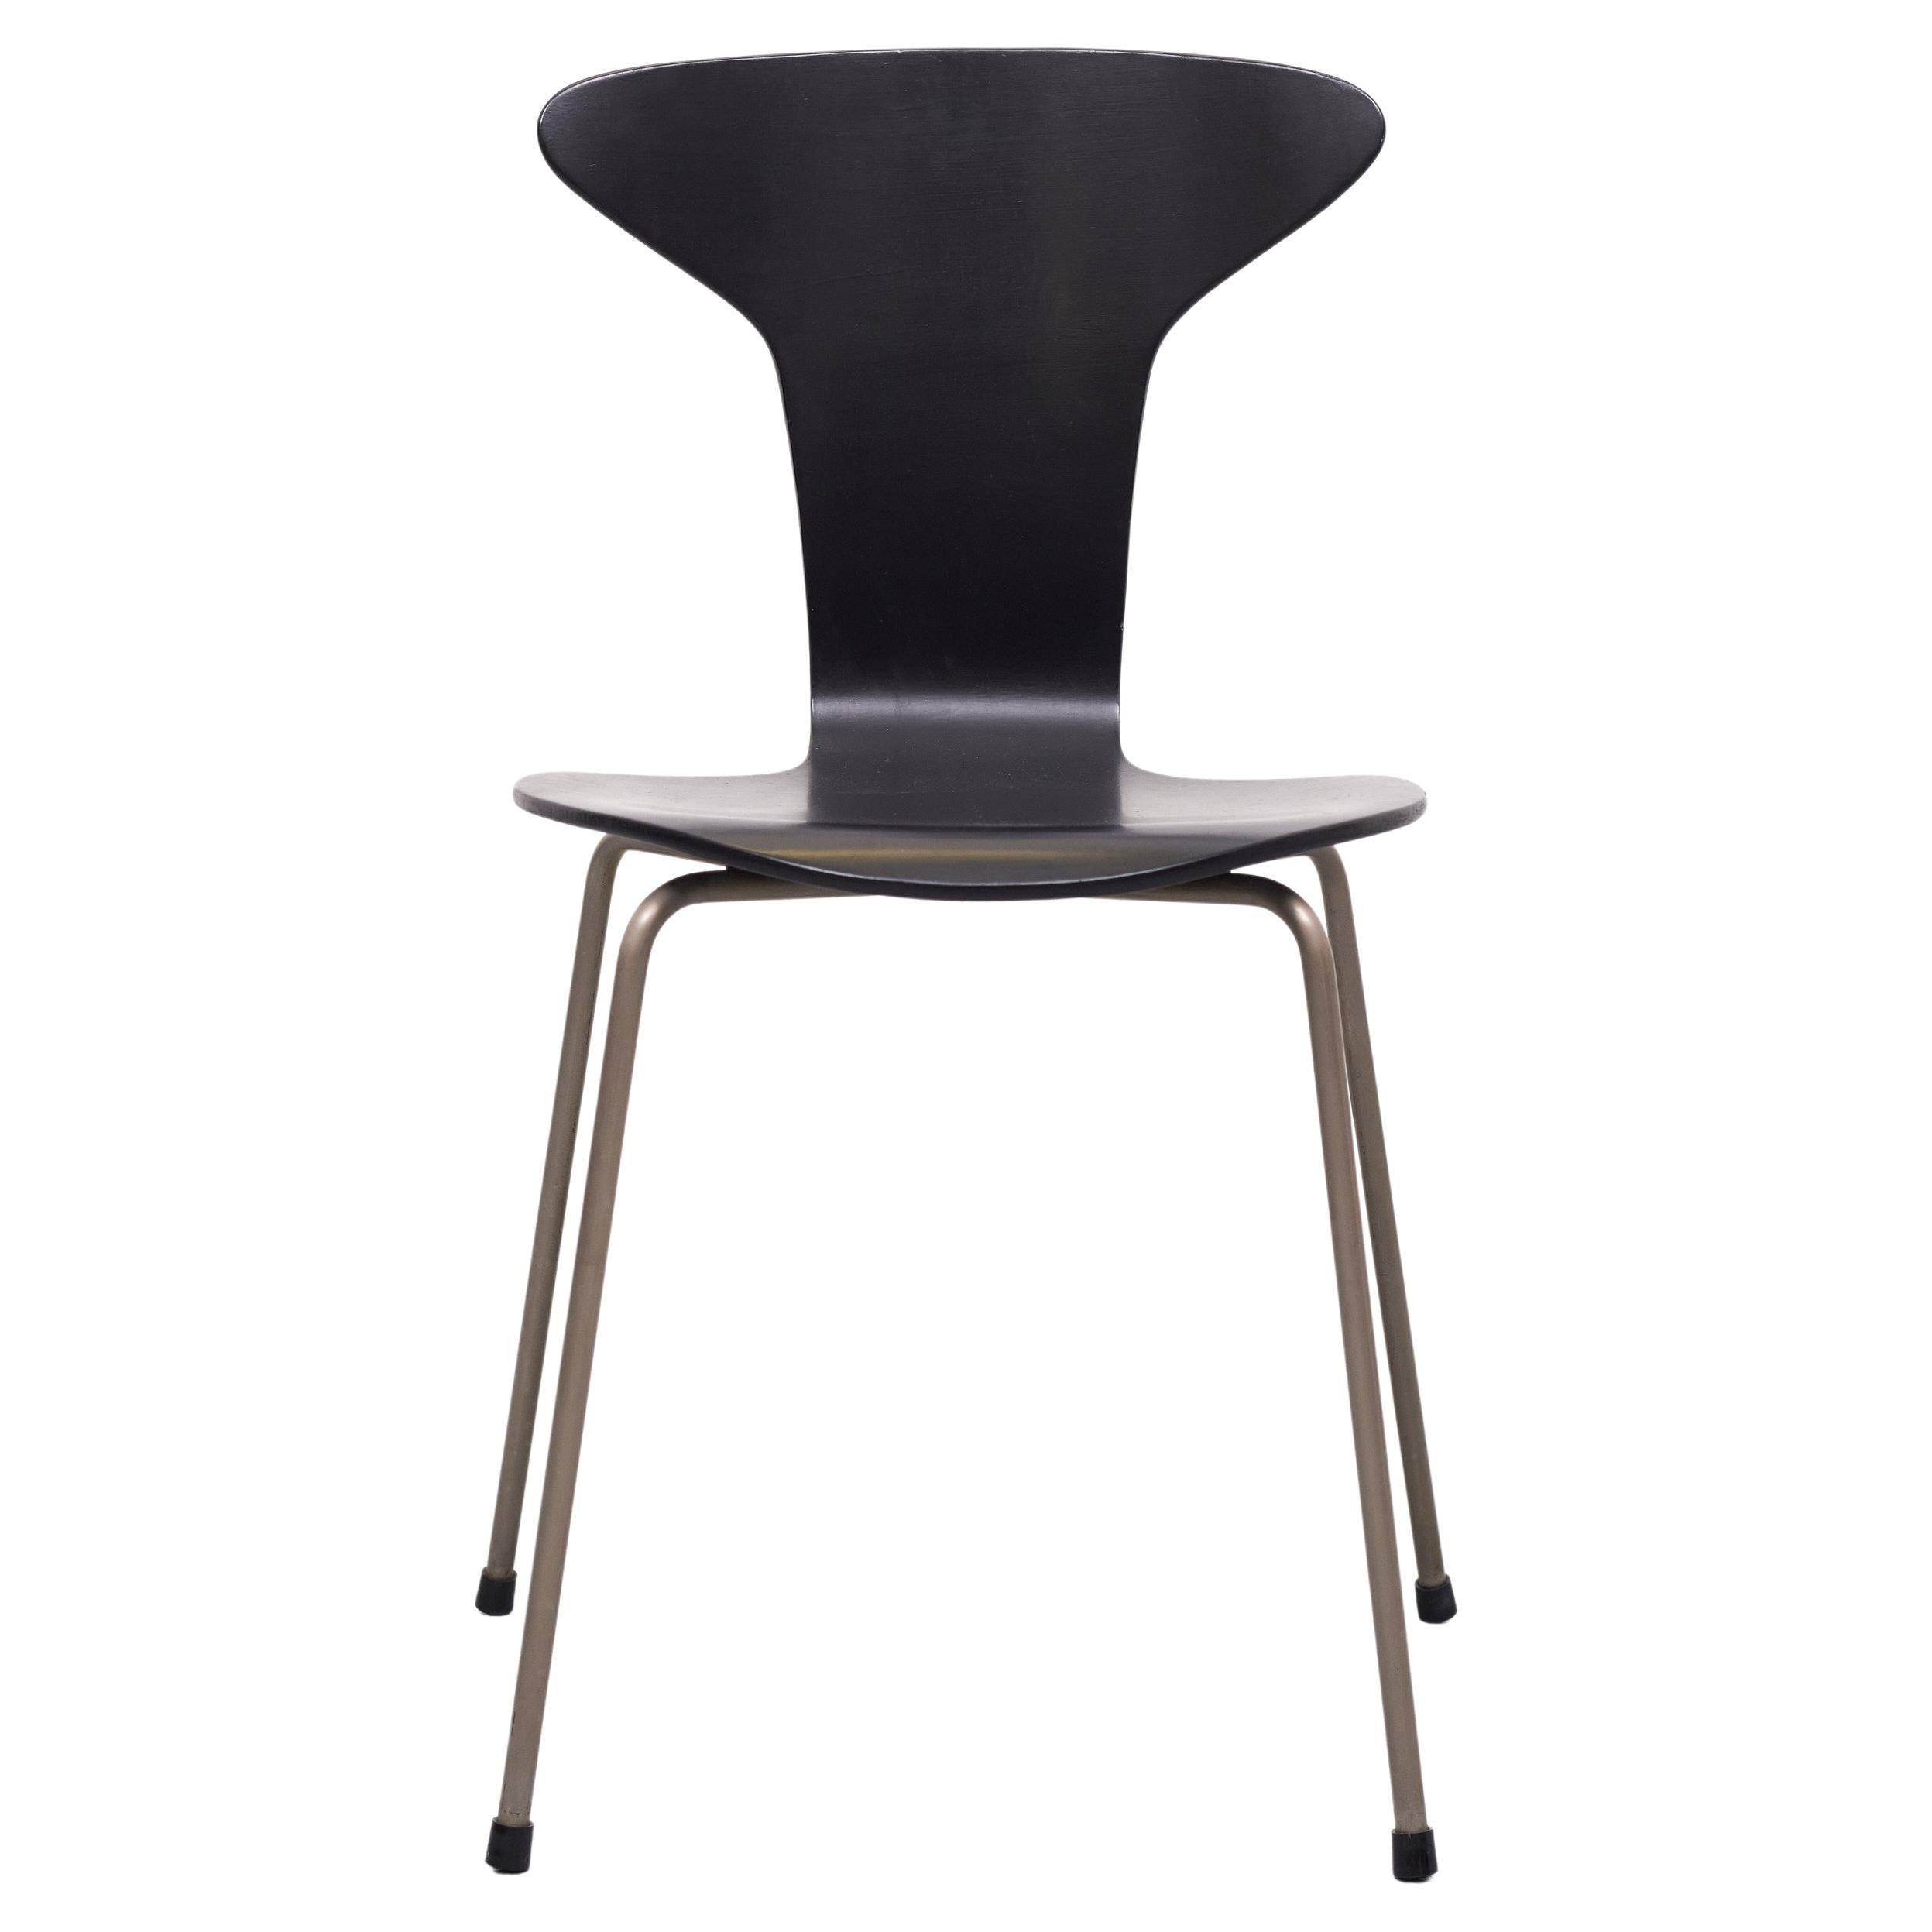 Mosquito Chair 3105 by Arne Jacobsen for Fritz Hansen, 1960s